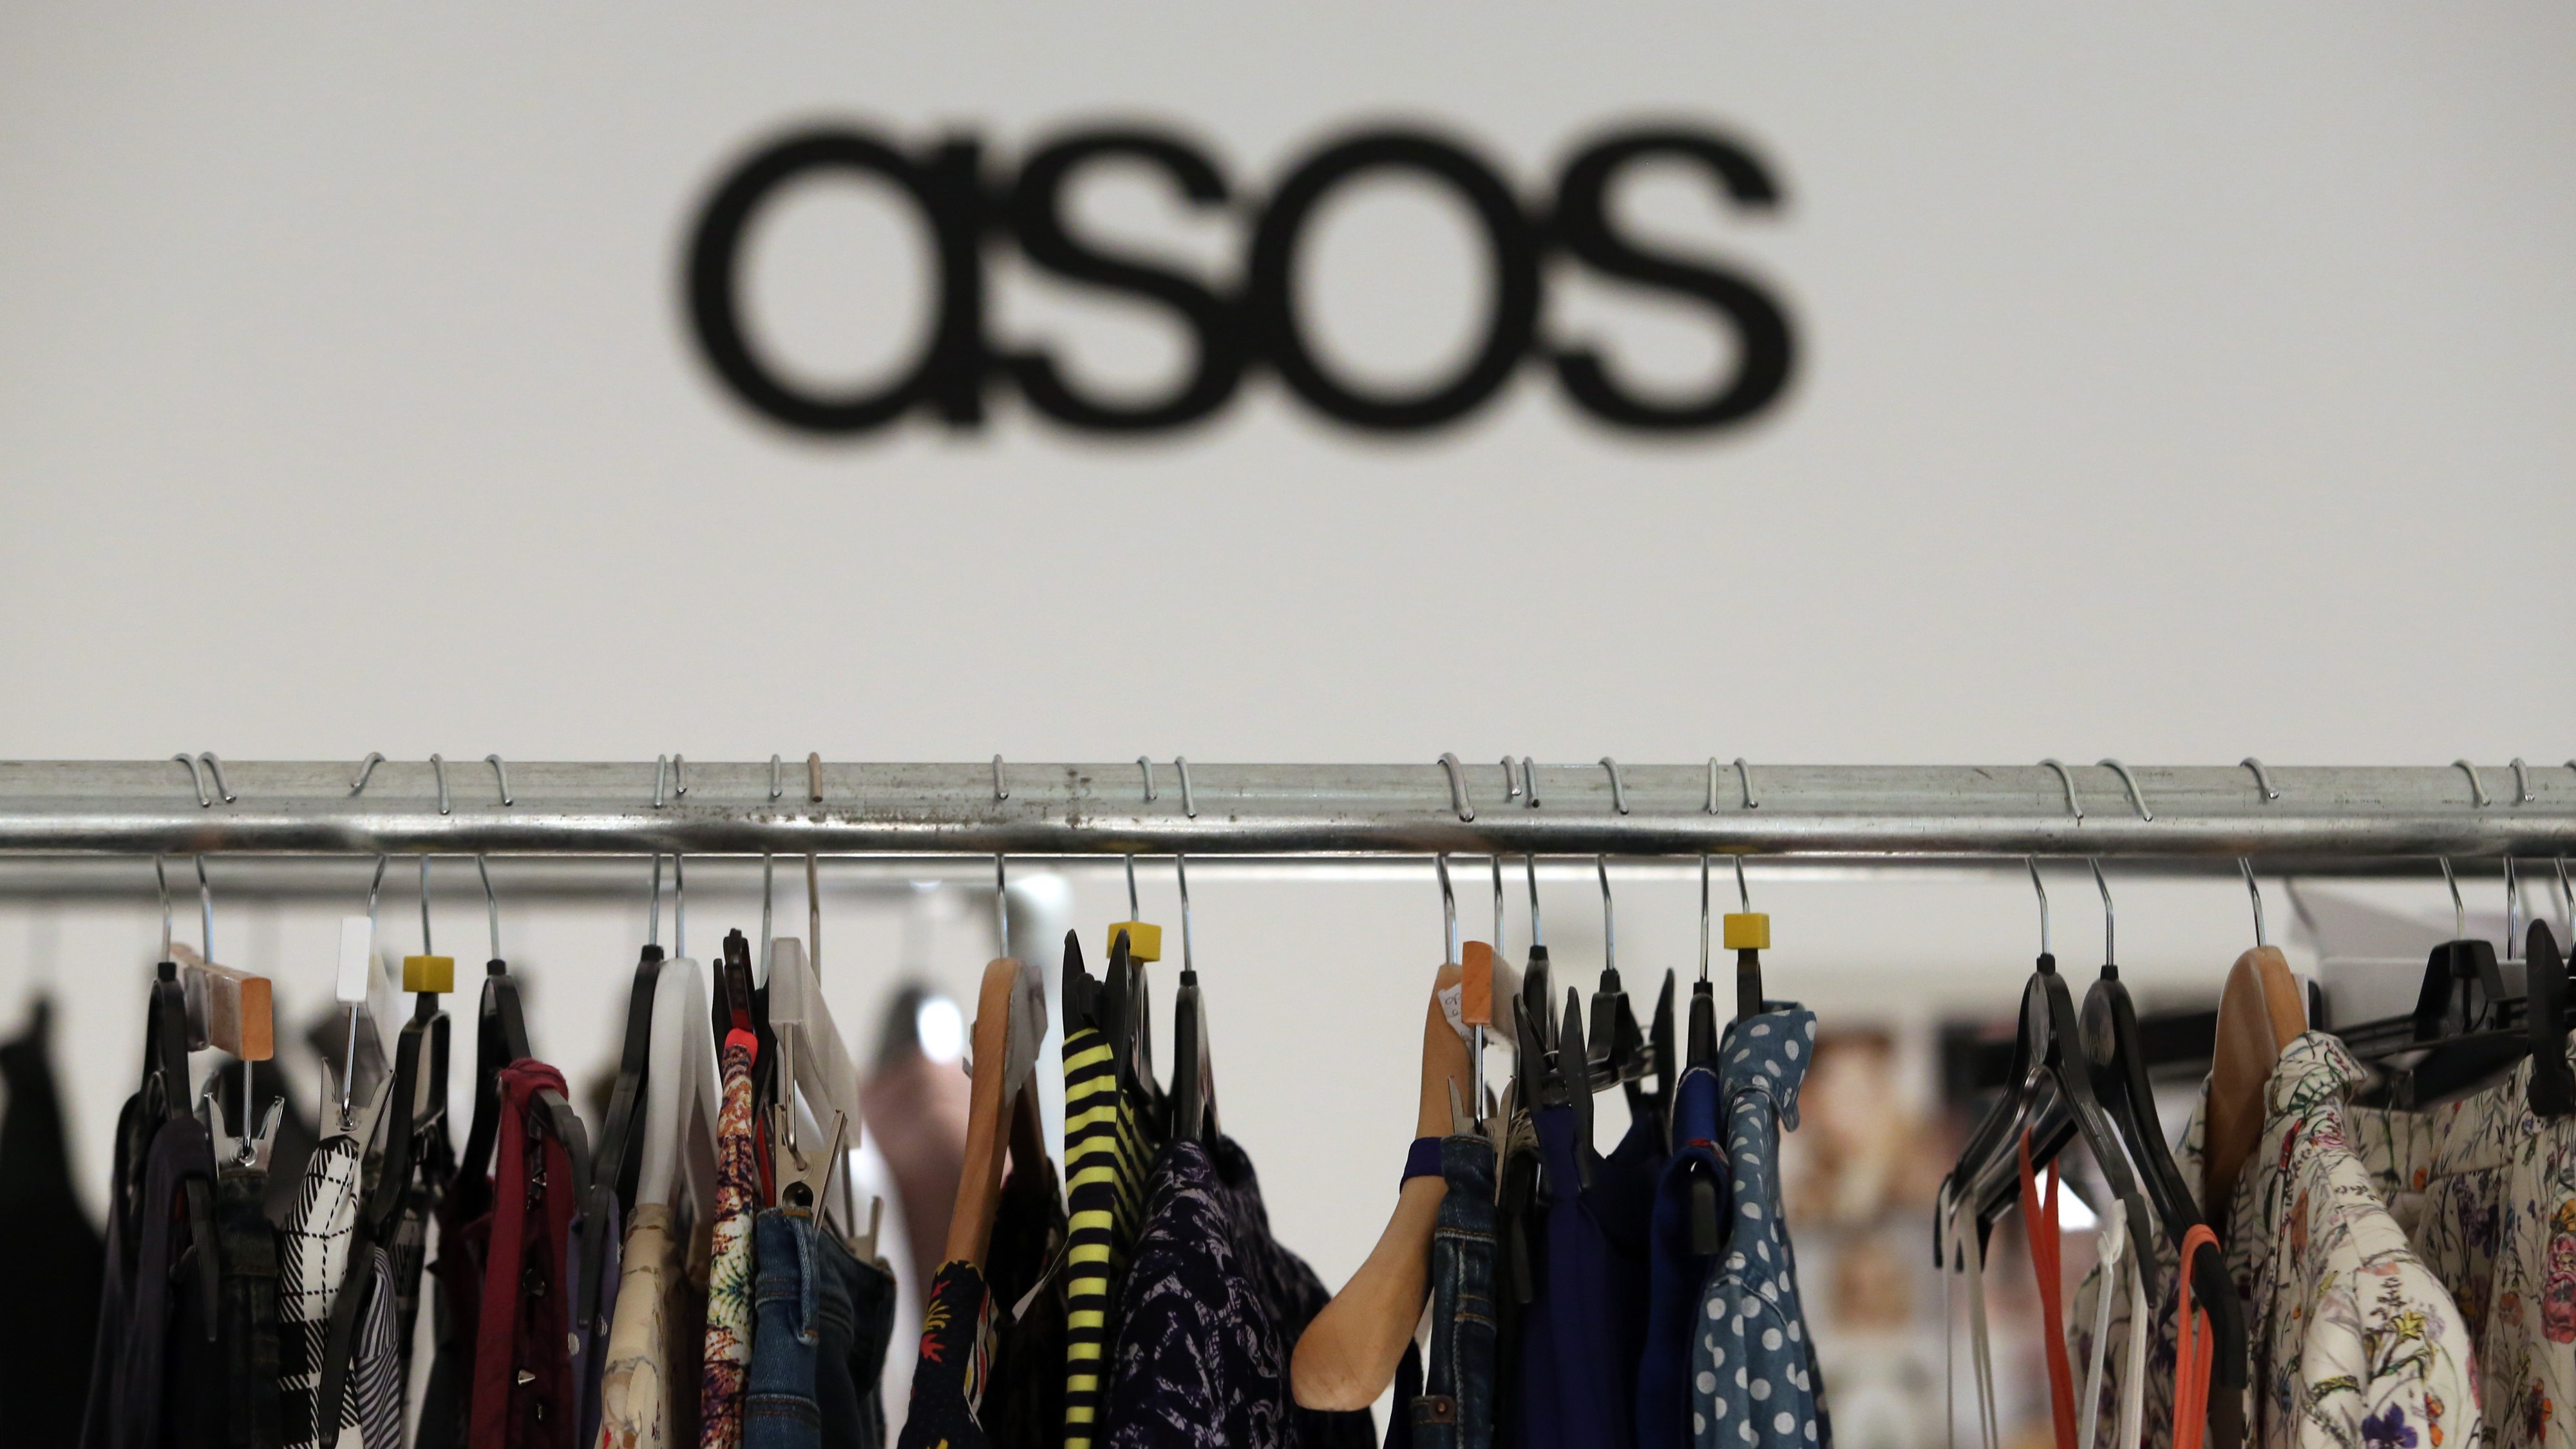 Asos clears out its old fashions on path to profitability